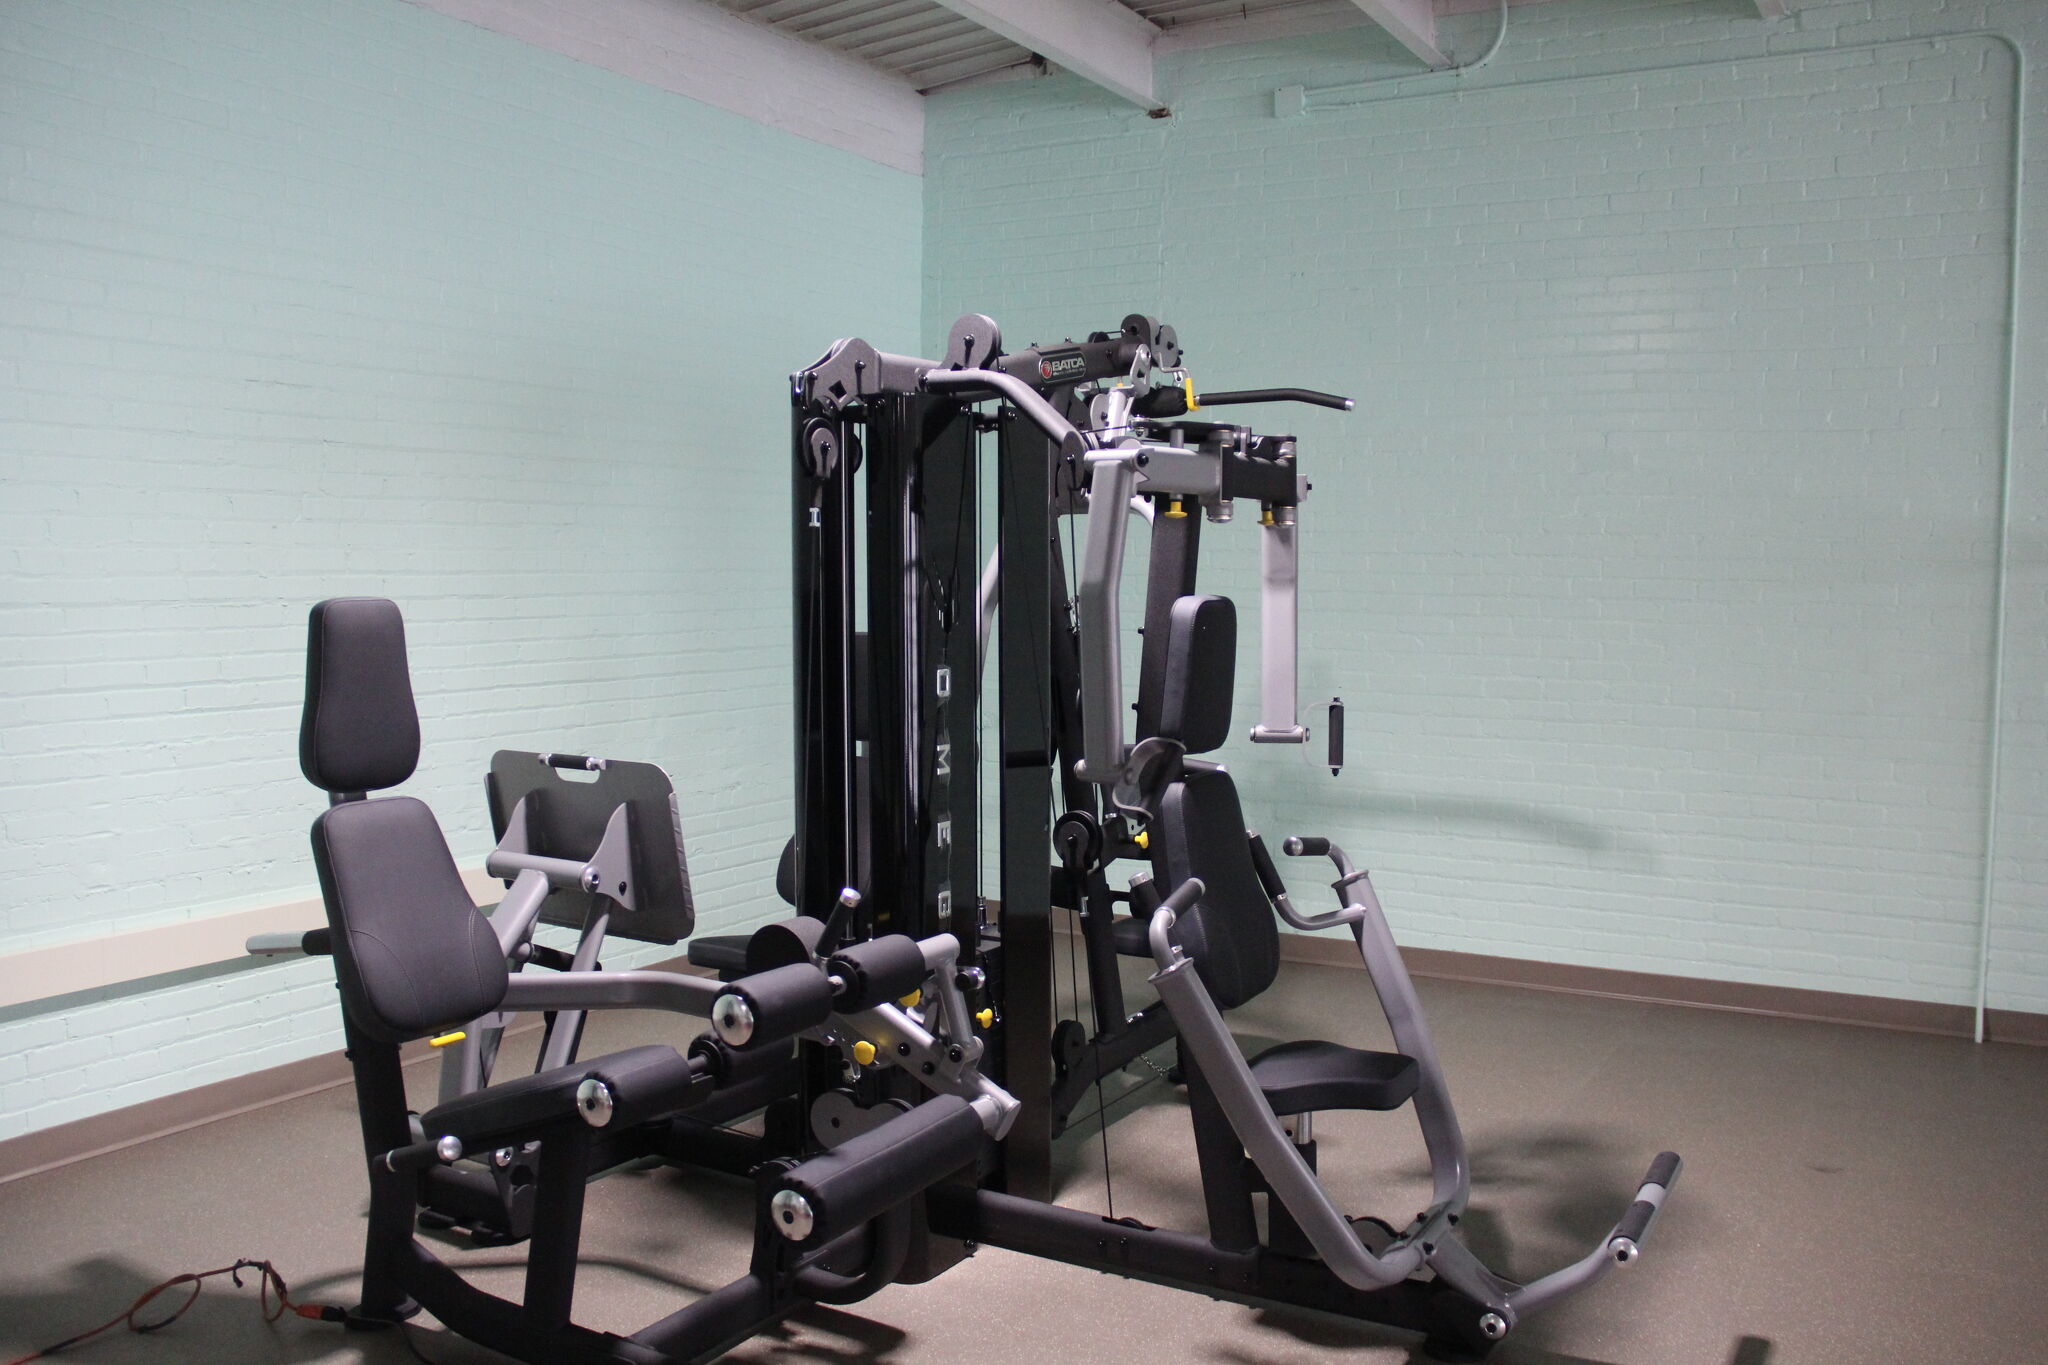 The Harbor Beach Library will open its new fitness center at the Harbor Beach Community House later this month.